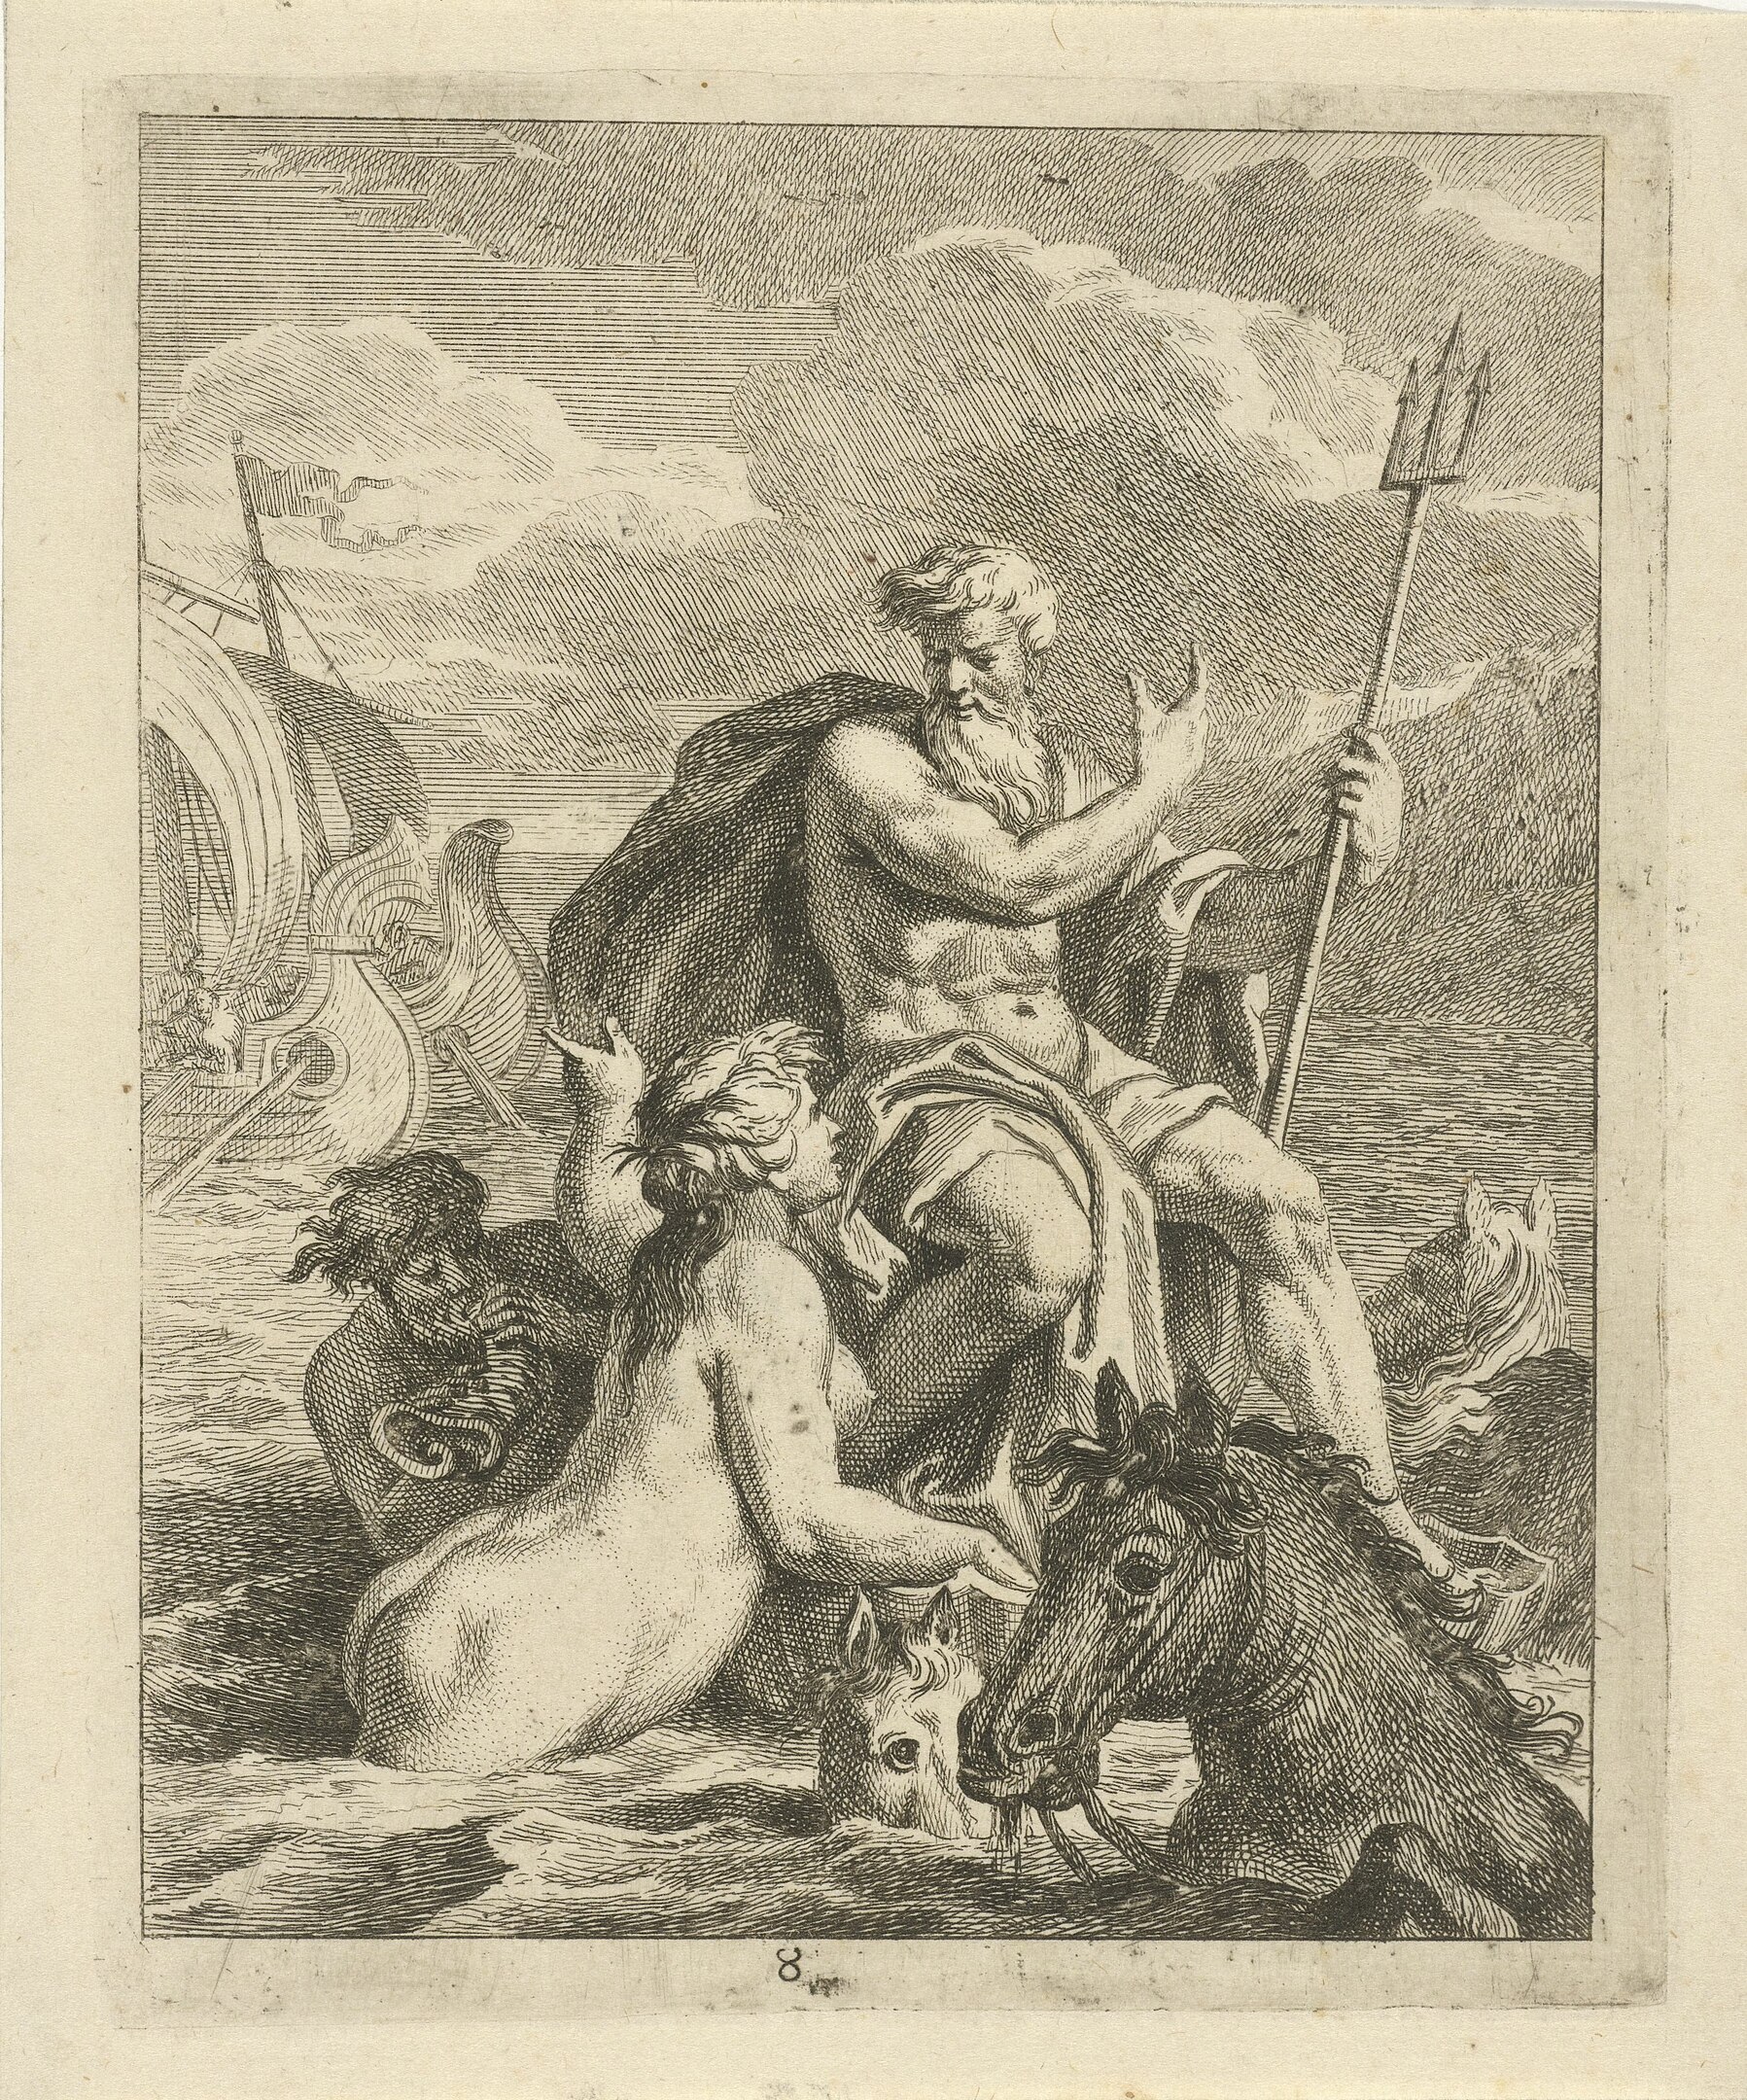 A man seated on a rock in the ocean listens to a creature speaking to him as he is surrounded by horses and ships